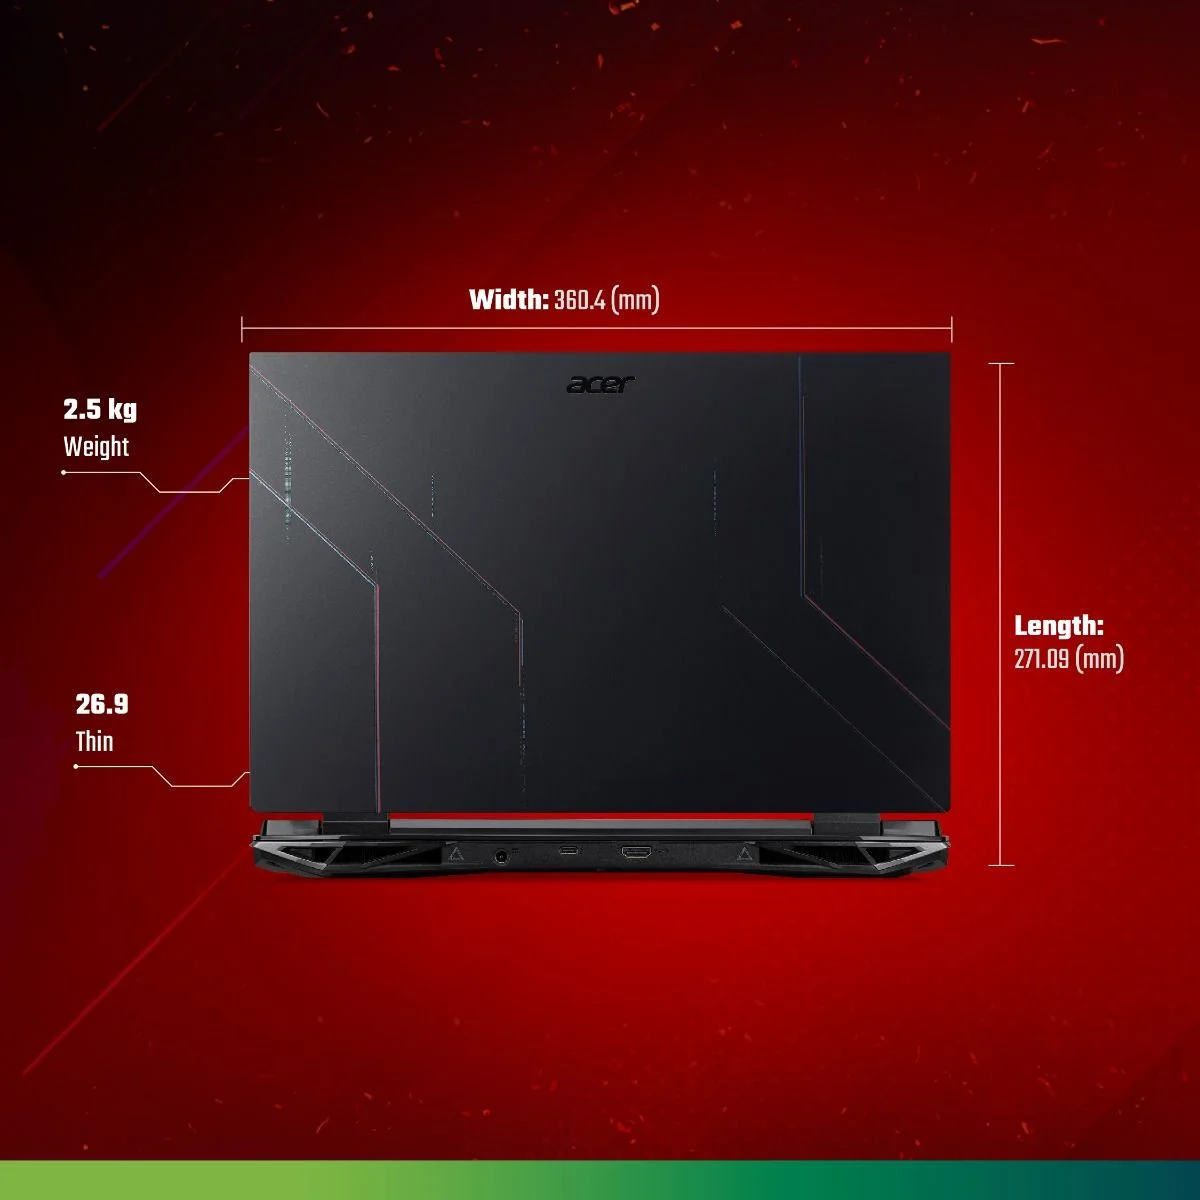 ACER NITRO 5 AMD More Immersive Experiences Ray Tracing is the holy grail of graphics. It simulates how light behaves in the real-world to produce the most realistic and immersive graphics.